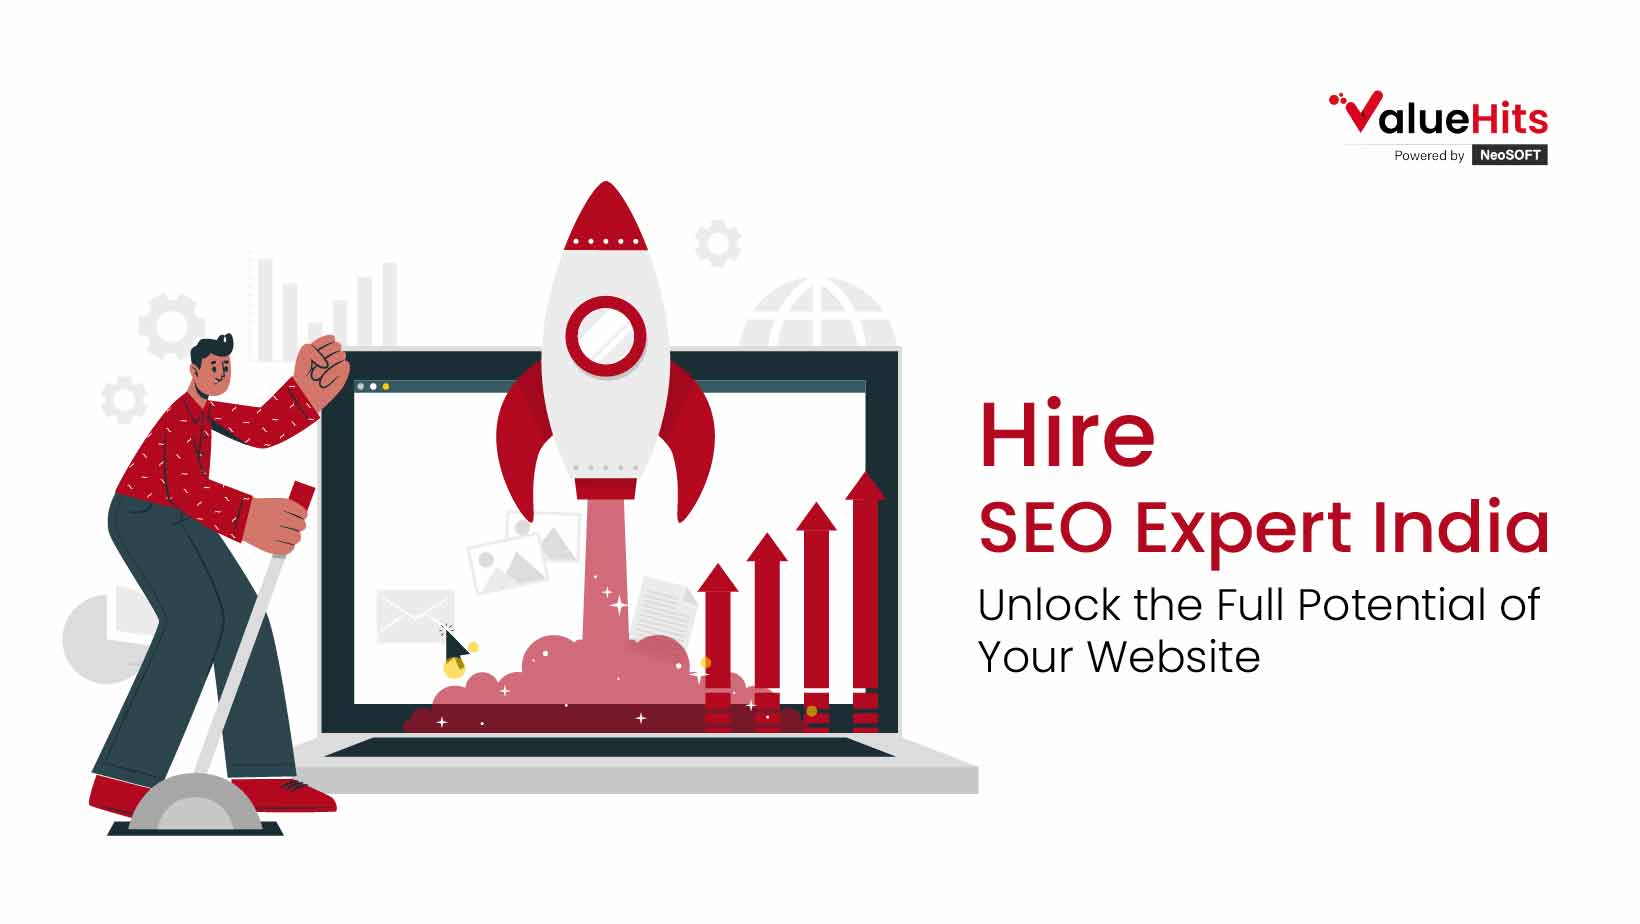 Hire SEO Expert India-Unlock the Full Potential of Your Website